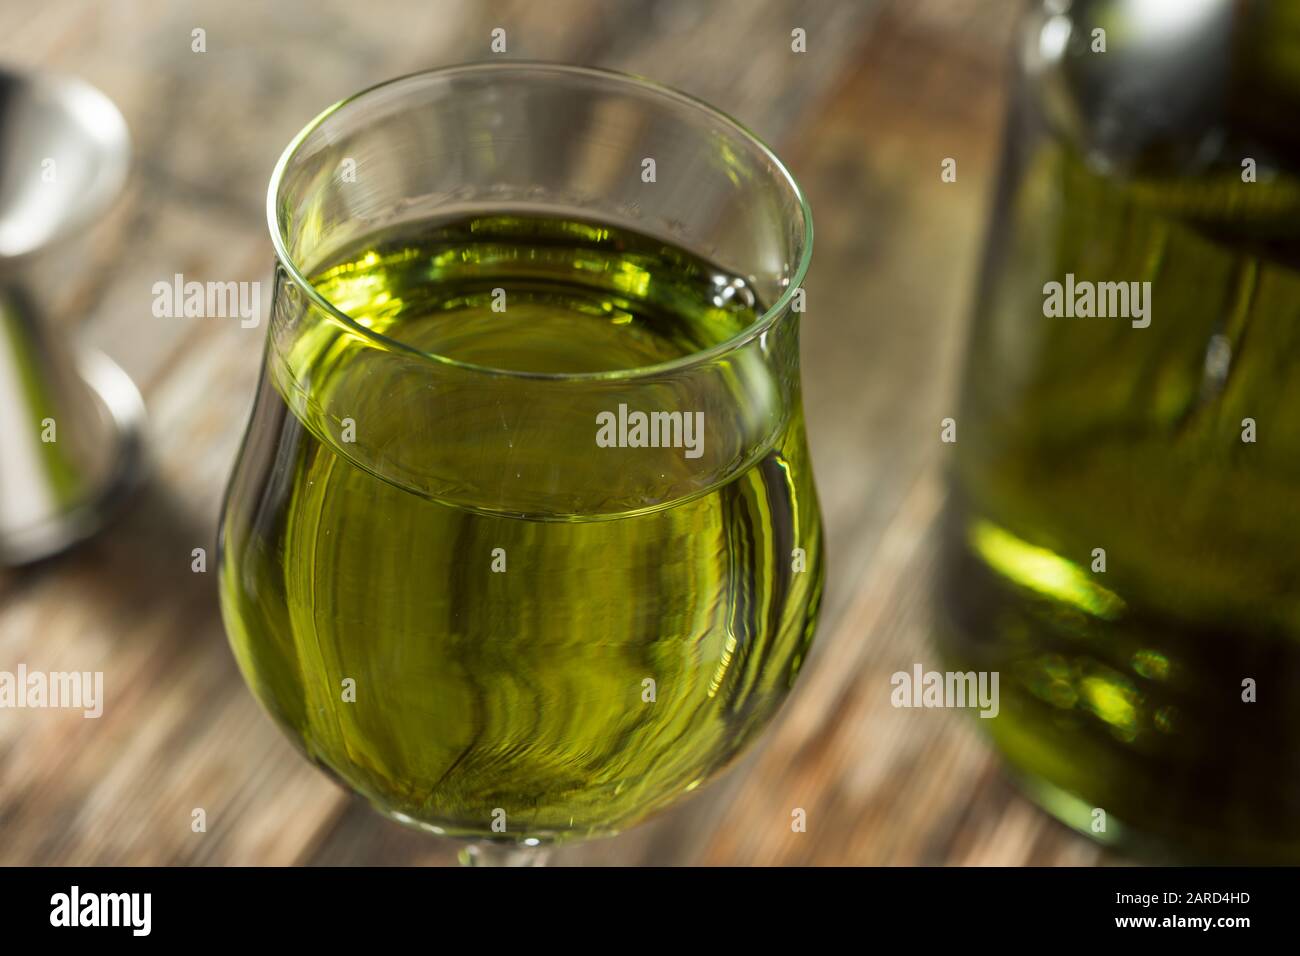 Organic Green Chartreuese Liqueur in a Glass Stock Photo